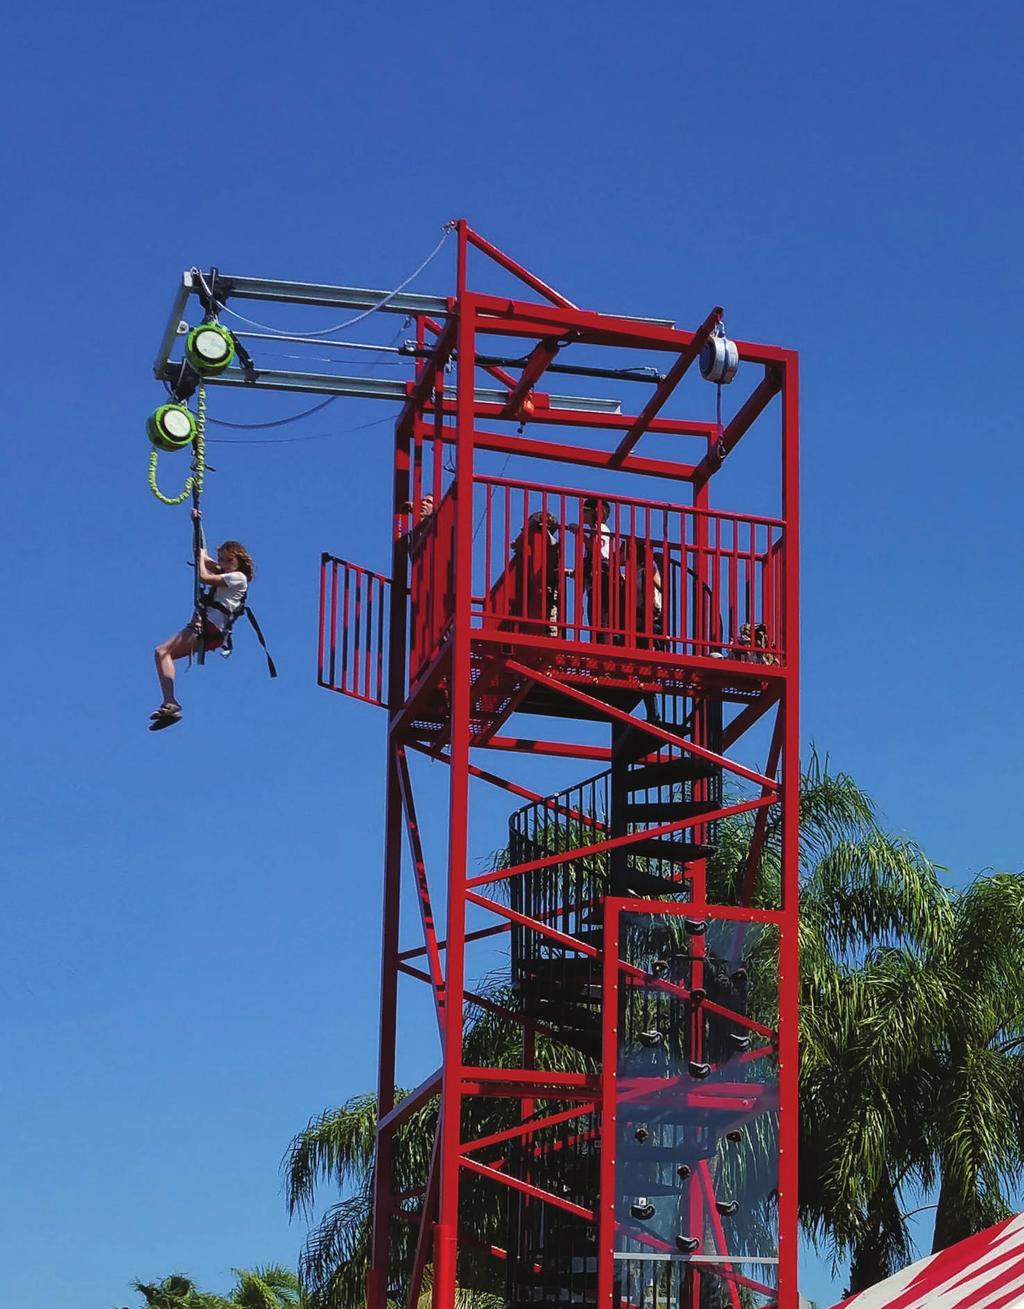 MOBILE FREE FALL Free Fall Combos with Rock Climbing, ZipLiner, Slide and Bungy 40ft.